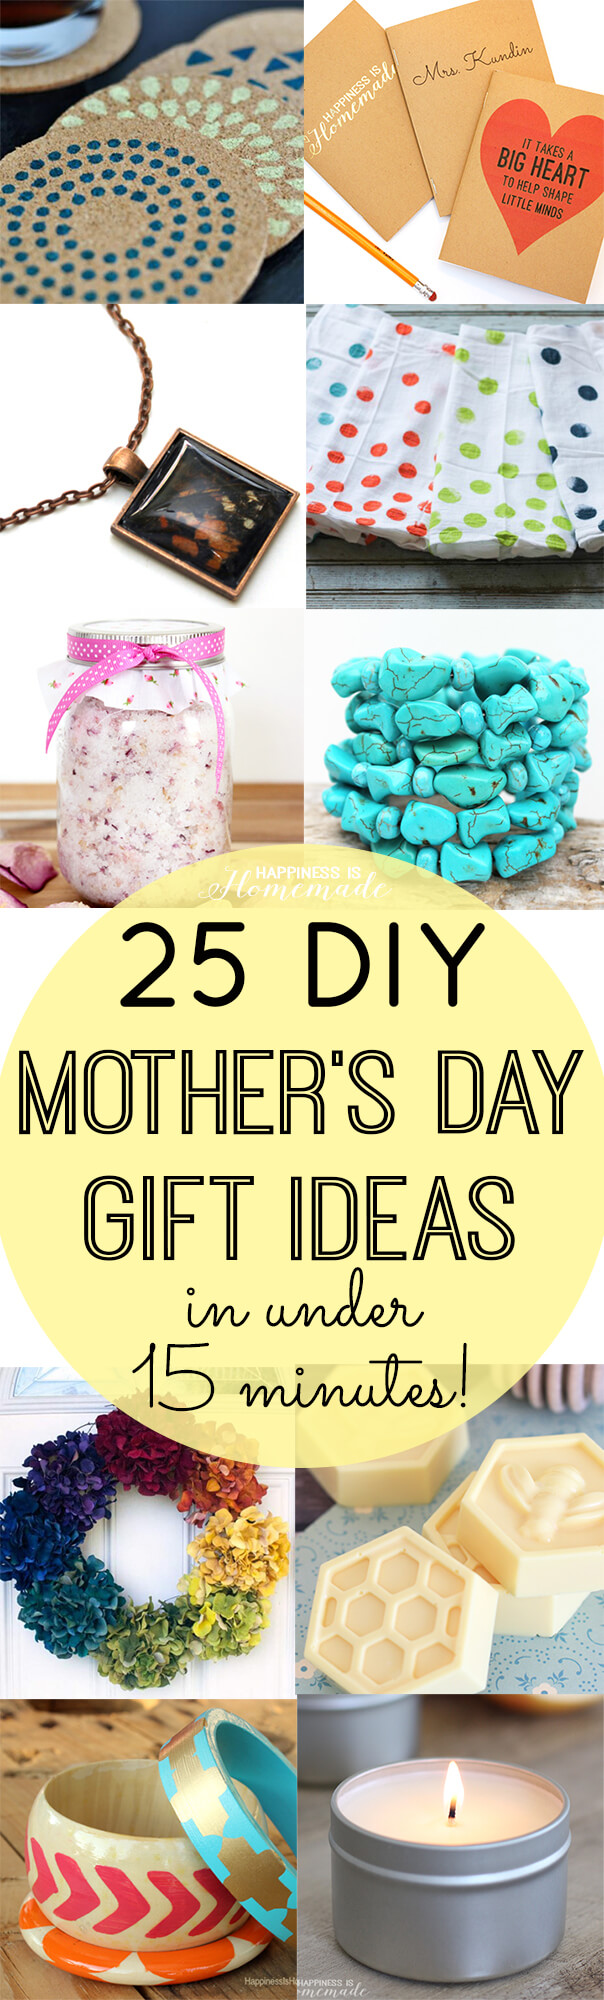 https://www.happinessishomemade.net/wp-content/uploads/2015/04/25-DIY-Mothers-Day-Gift-Ideas-in-Under-15-Minutes.jpg